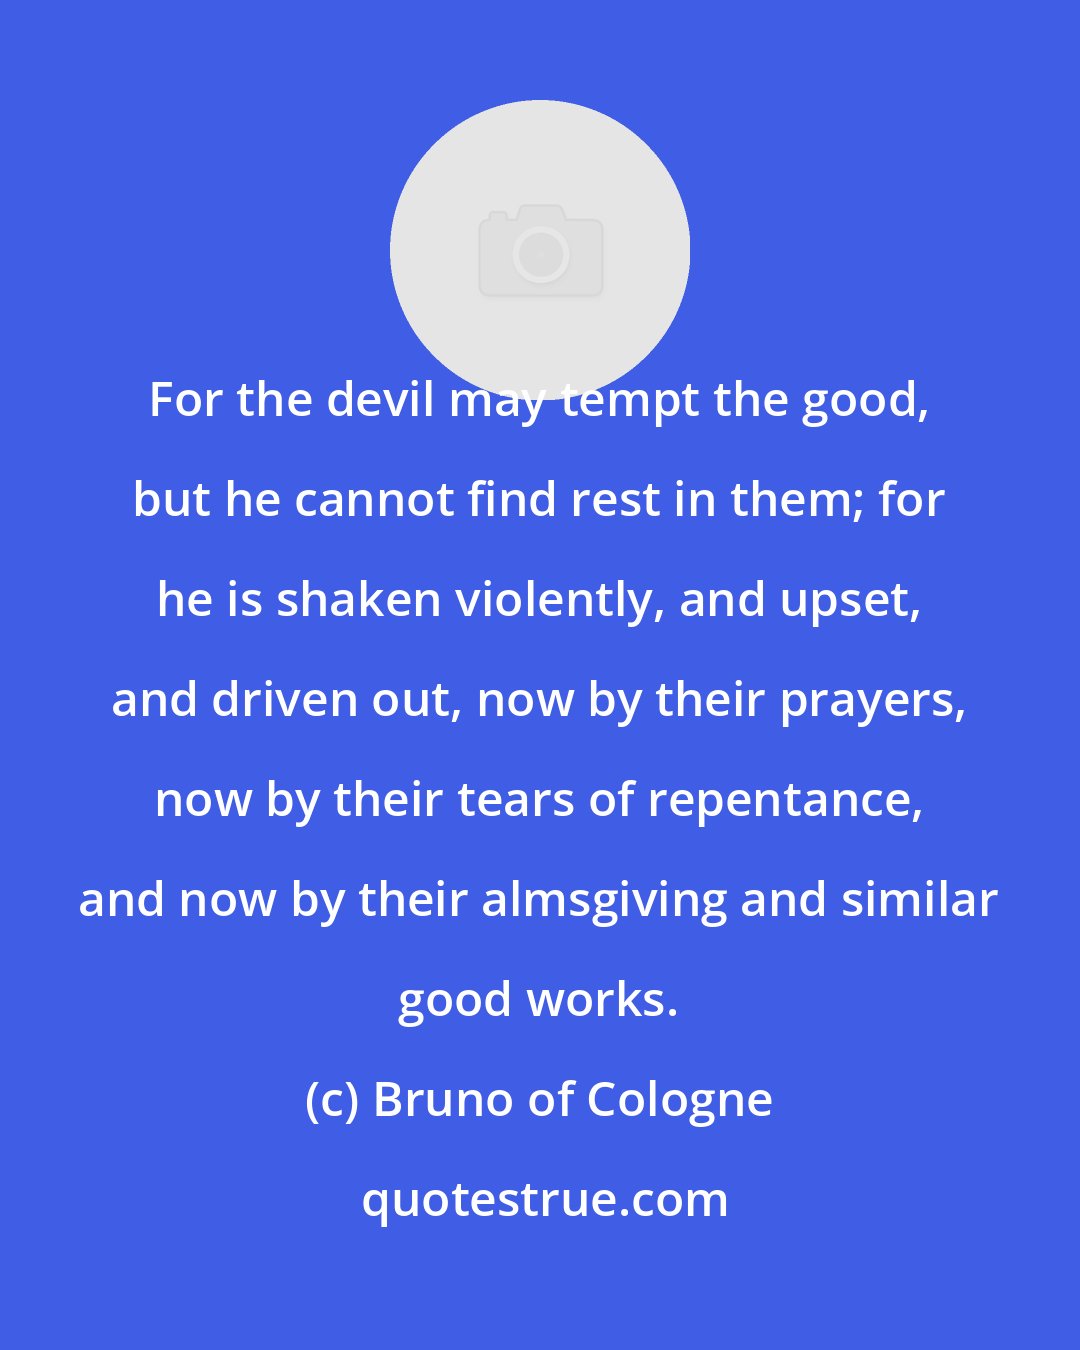 Bruno of Cologne: For the devil may tempt the good, but he cannot find rest in them; for he is shaken violently, and upset, and driven out, now by their prayers, now by their tears of repentance, and now by their almsgiving and similar good works.